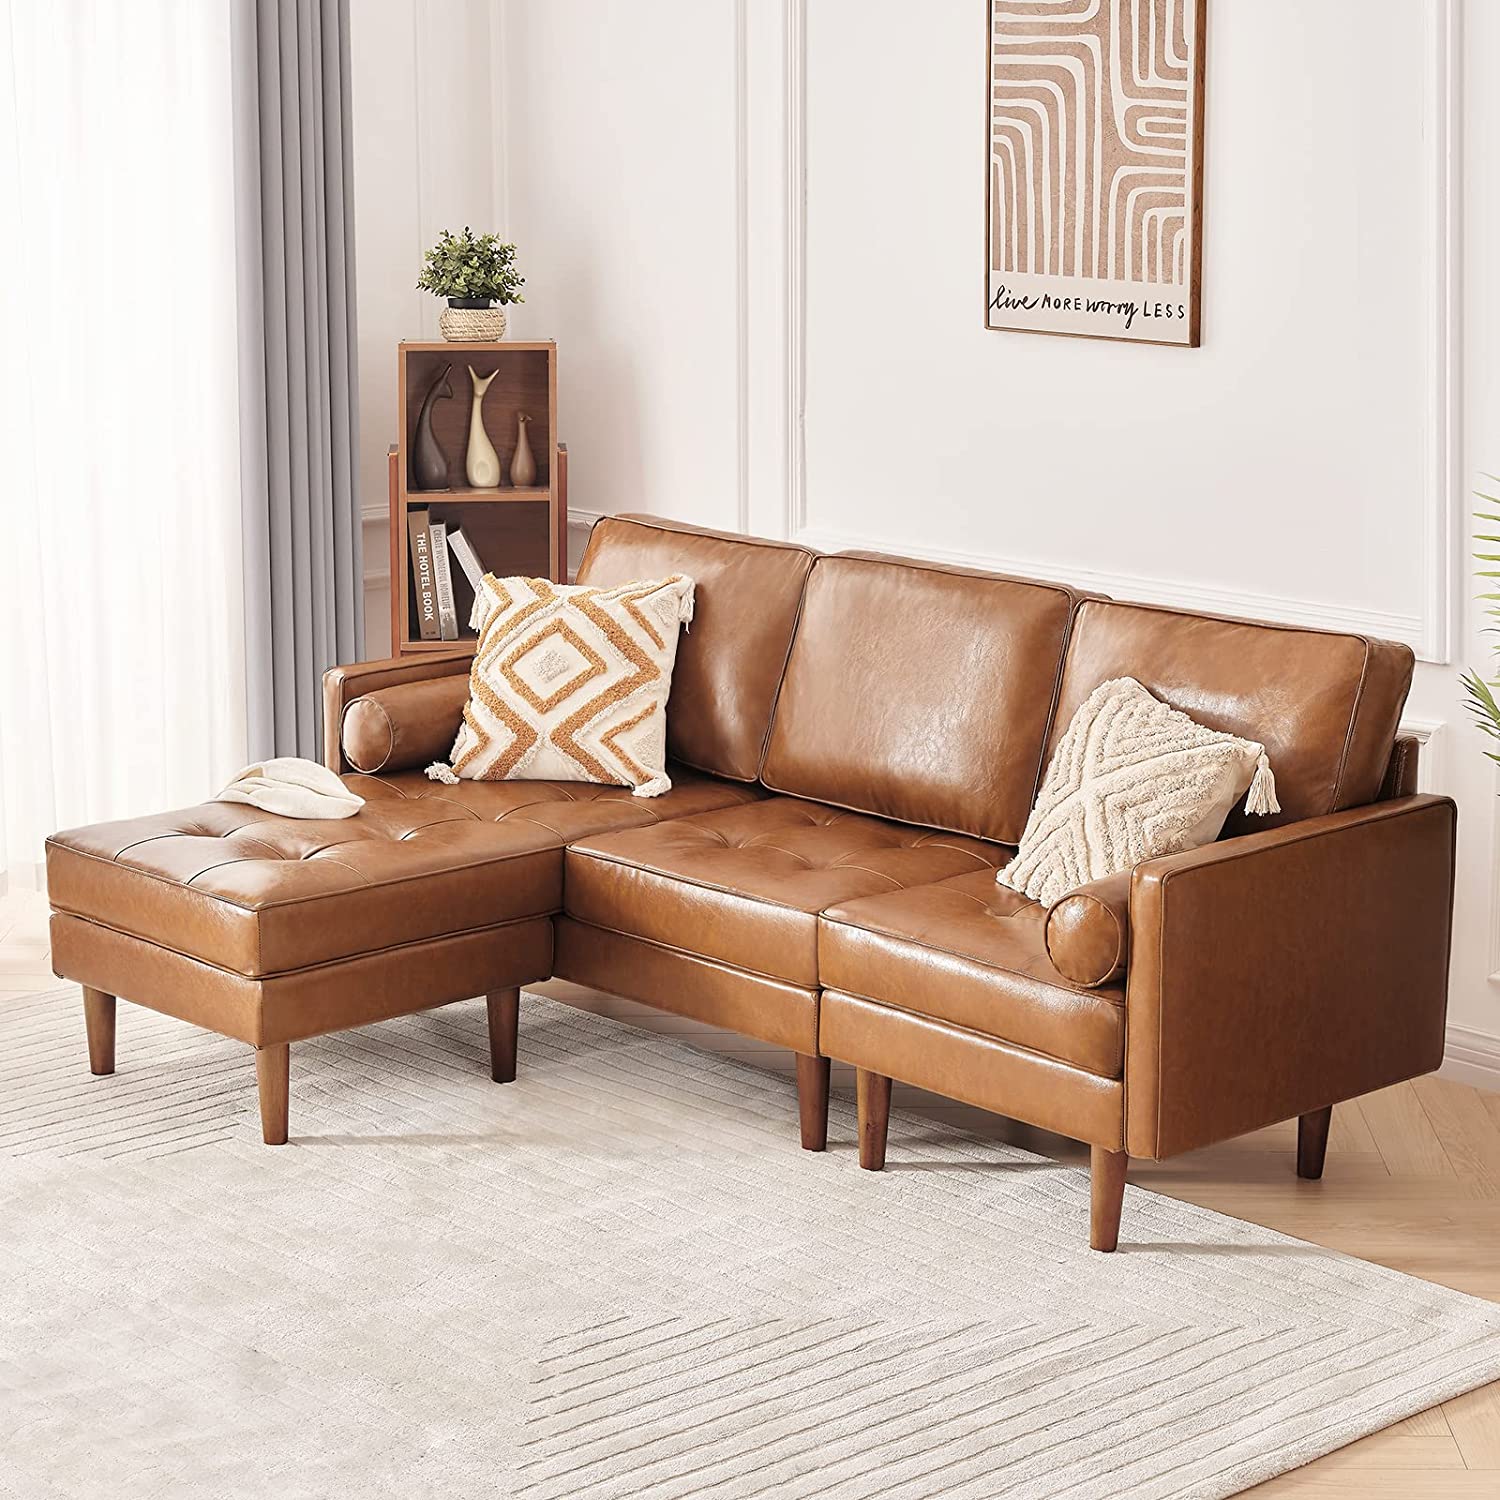 Vonanda Sofa Couch, Sectional Sofa Faux Leather Couch for Living Room and Small Space, L Shaped Couch with Reversible Chaise and Tufted Seat Cushion